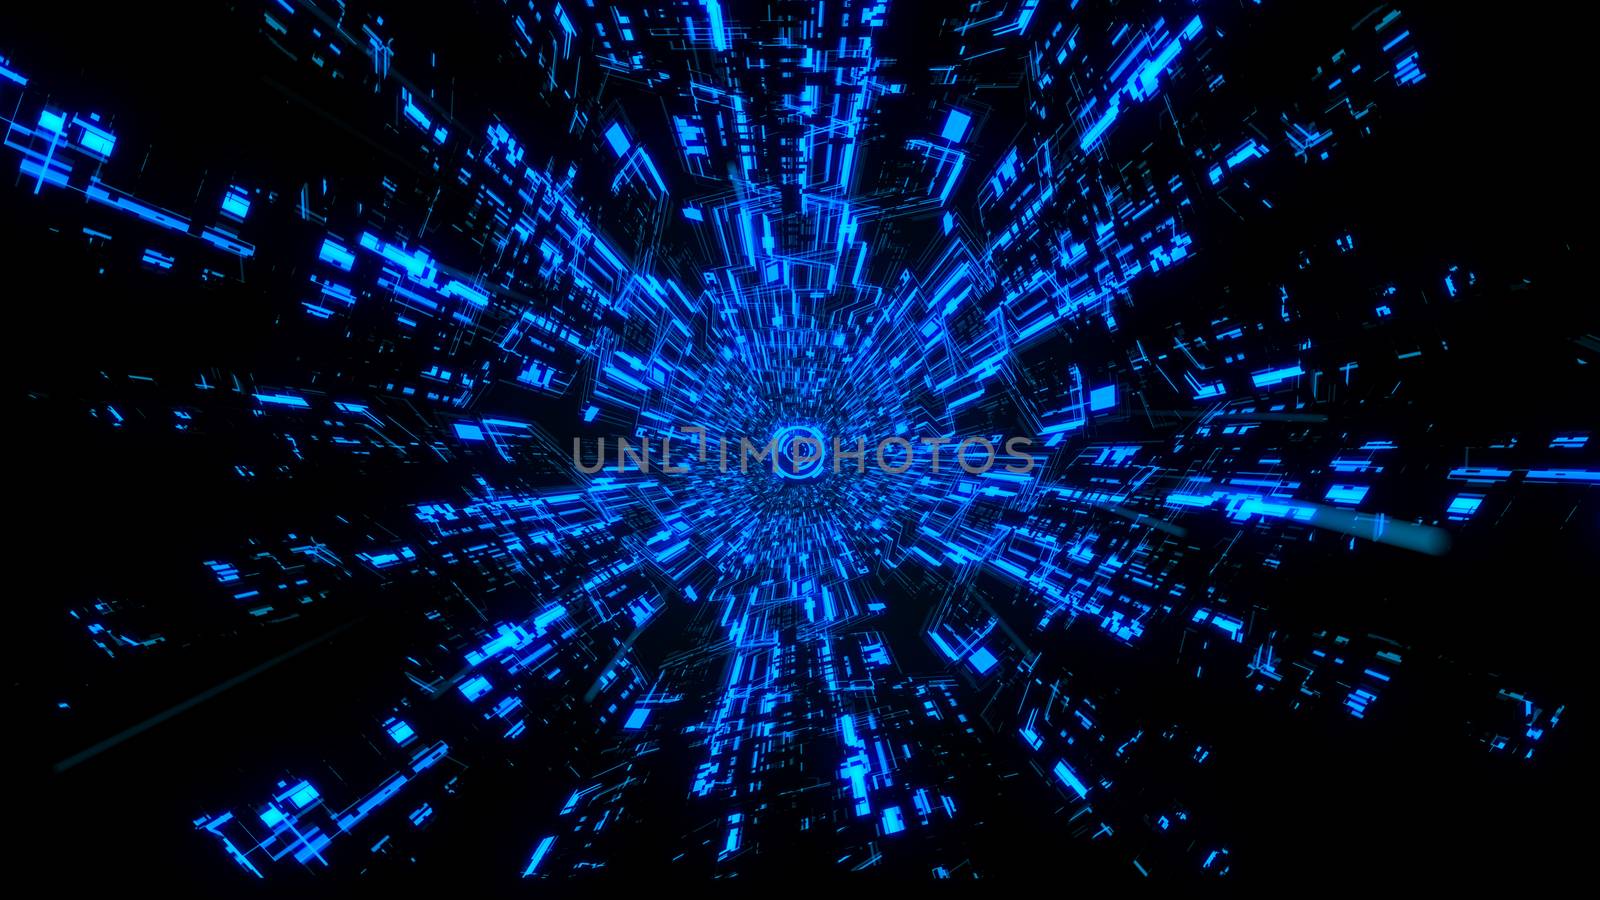 3D Digital Circuit System Tunnels and Waves with Digital Circles in the middle in Blue color theme Background Ver.1 by ariya23156